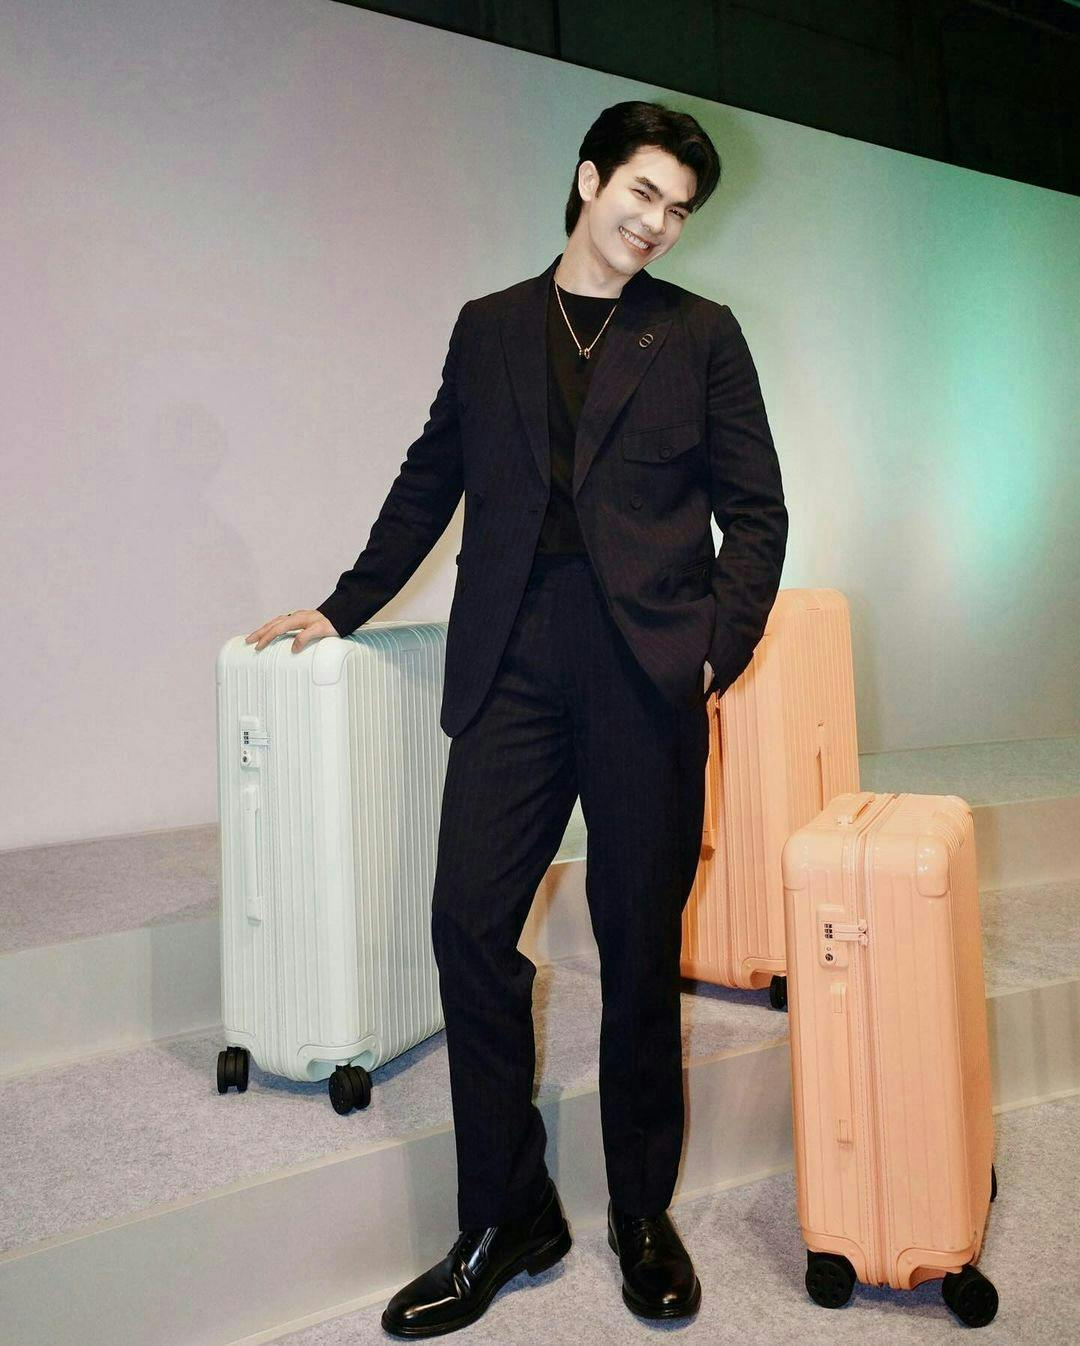 formal wear suit adult male man person baggage standing blazer coat